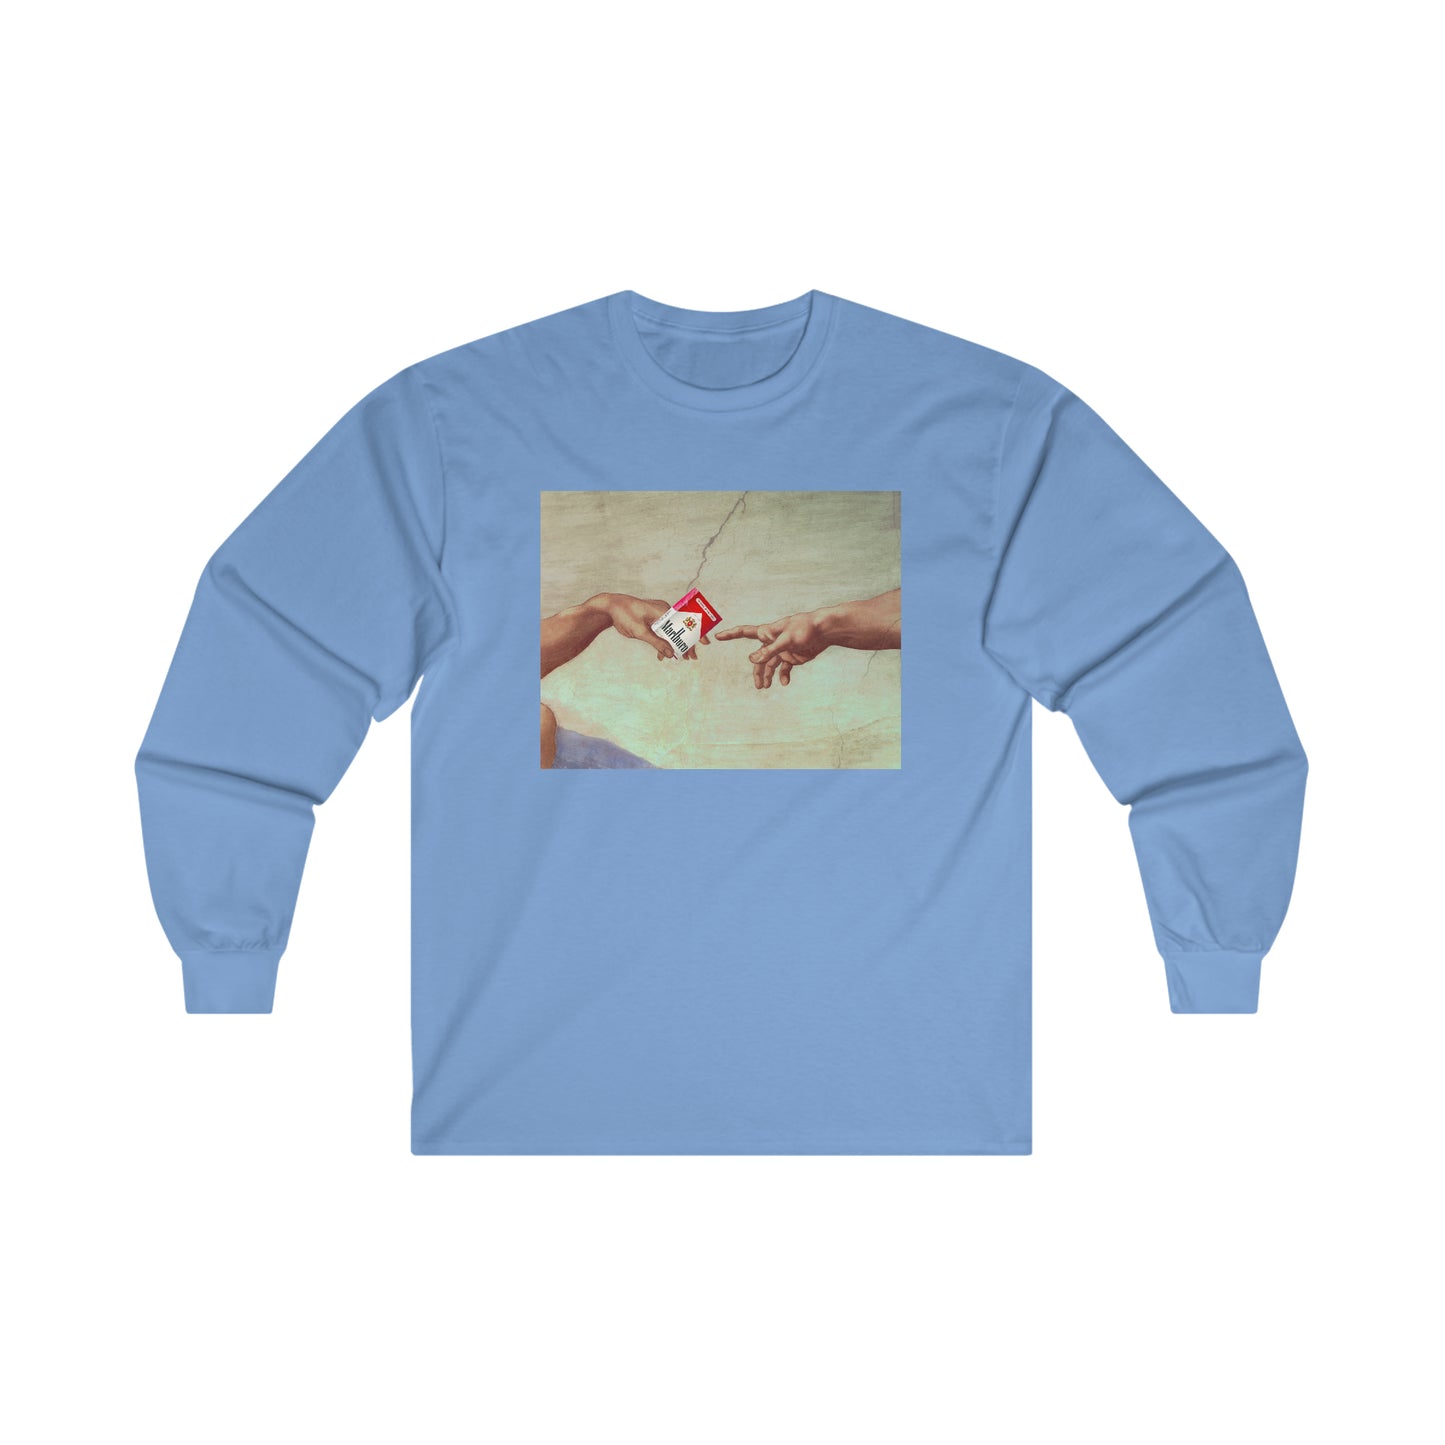 Gods Hand passing cigarettes - Ultra Cotton Long Sleeve Tee